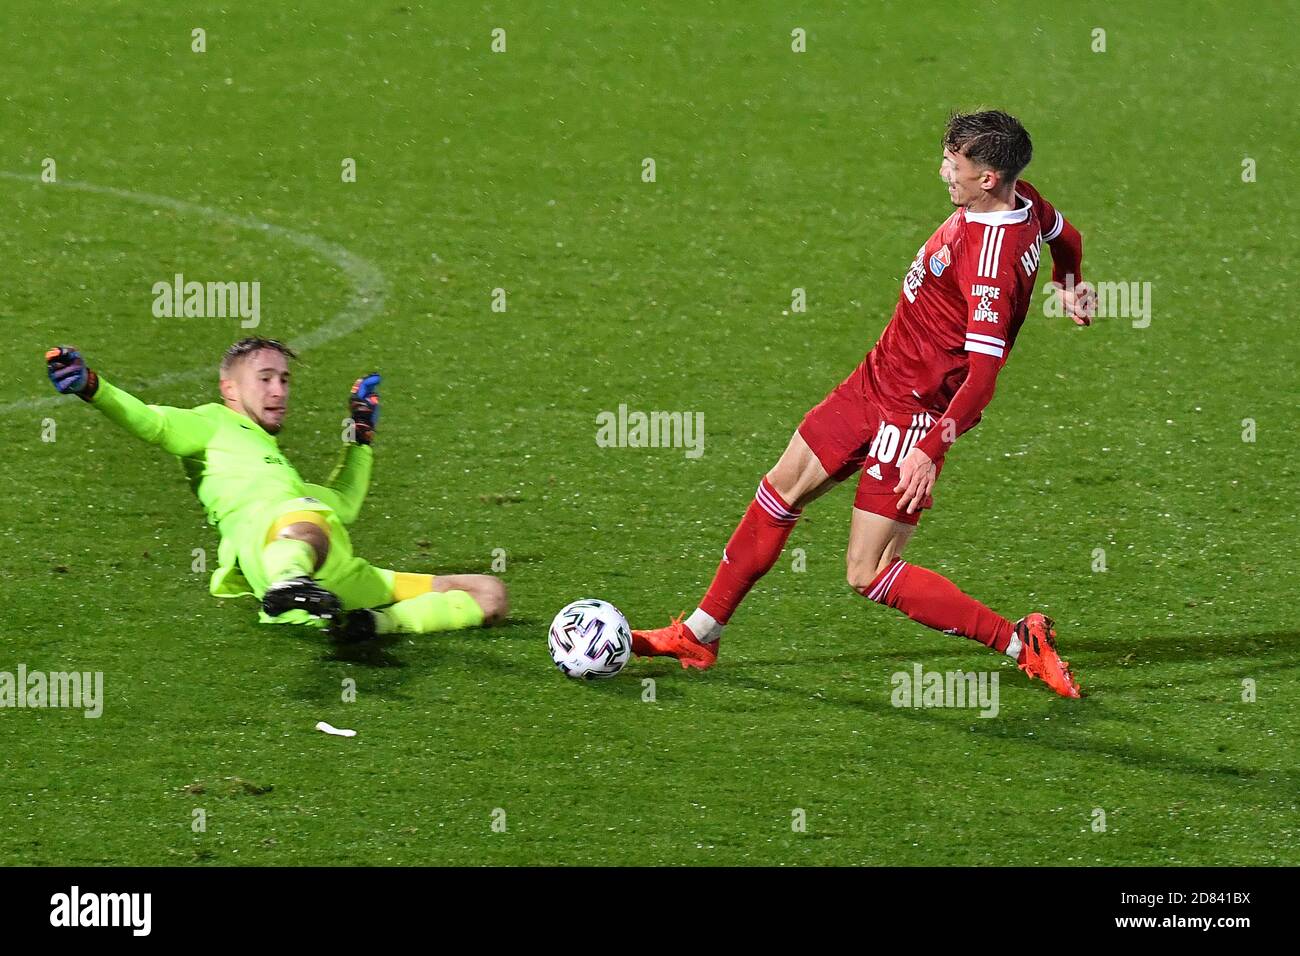 on the ground: Marco Hiller, goalwart (Munich 1860), Ayguen YLDIRIM (Verl)  after duels, action, Stock Photo, Picture And Rights Managed Image. Pic.  PAH-141549900